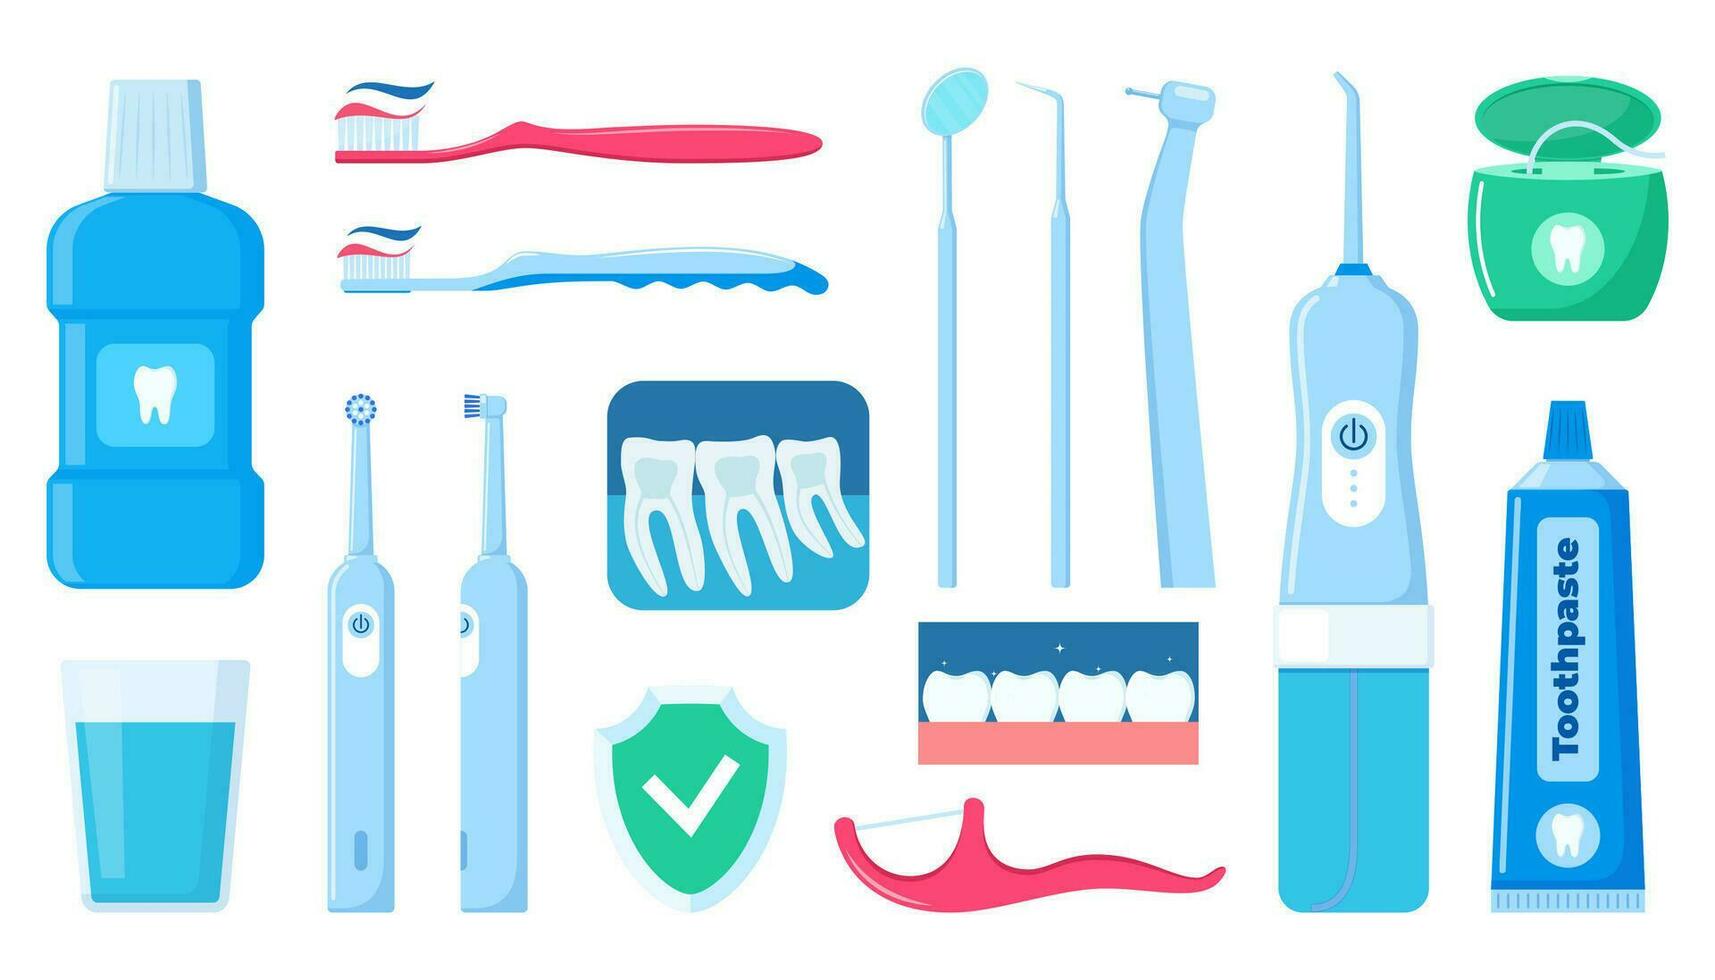 Dental cleaning tools. Oral care and hygiene products. Toothbrush, toothpaste, mouthwash, floss toothpick, dental floss, dental irrigator. Brushing teeth. Vector illustration.